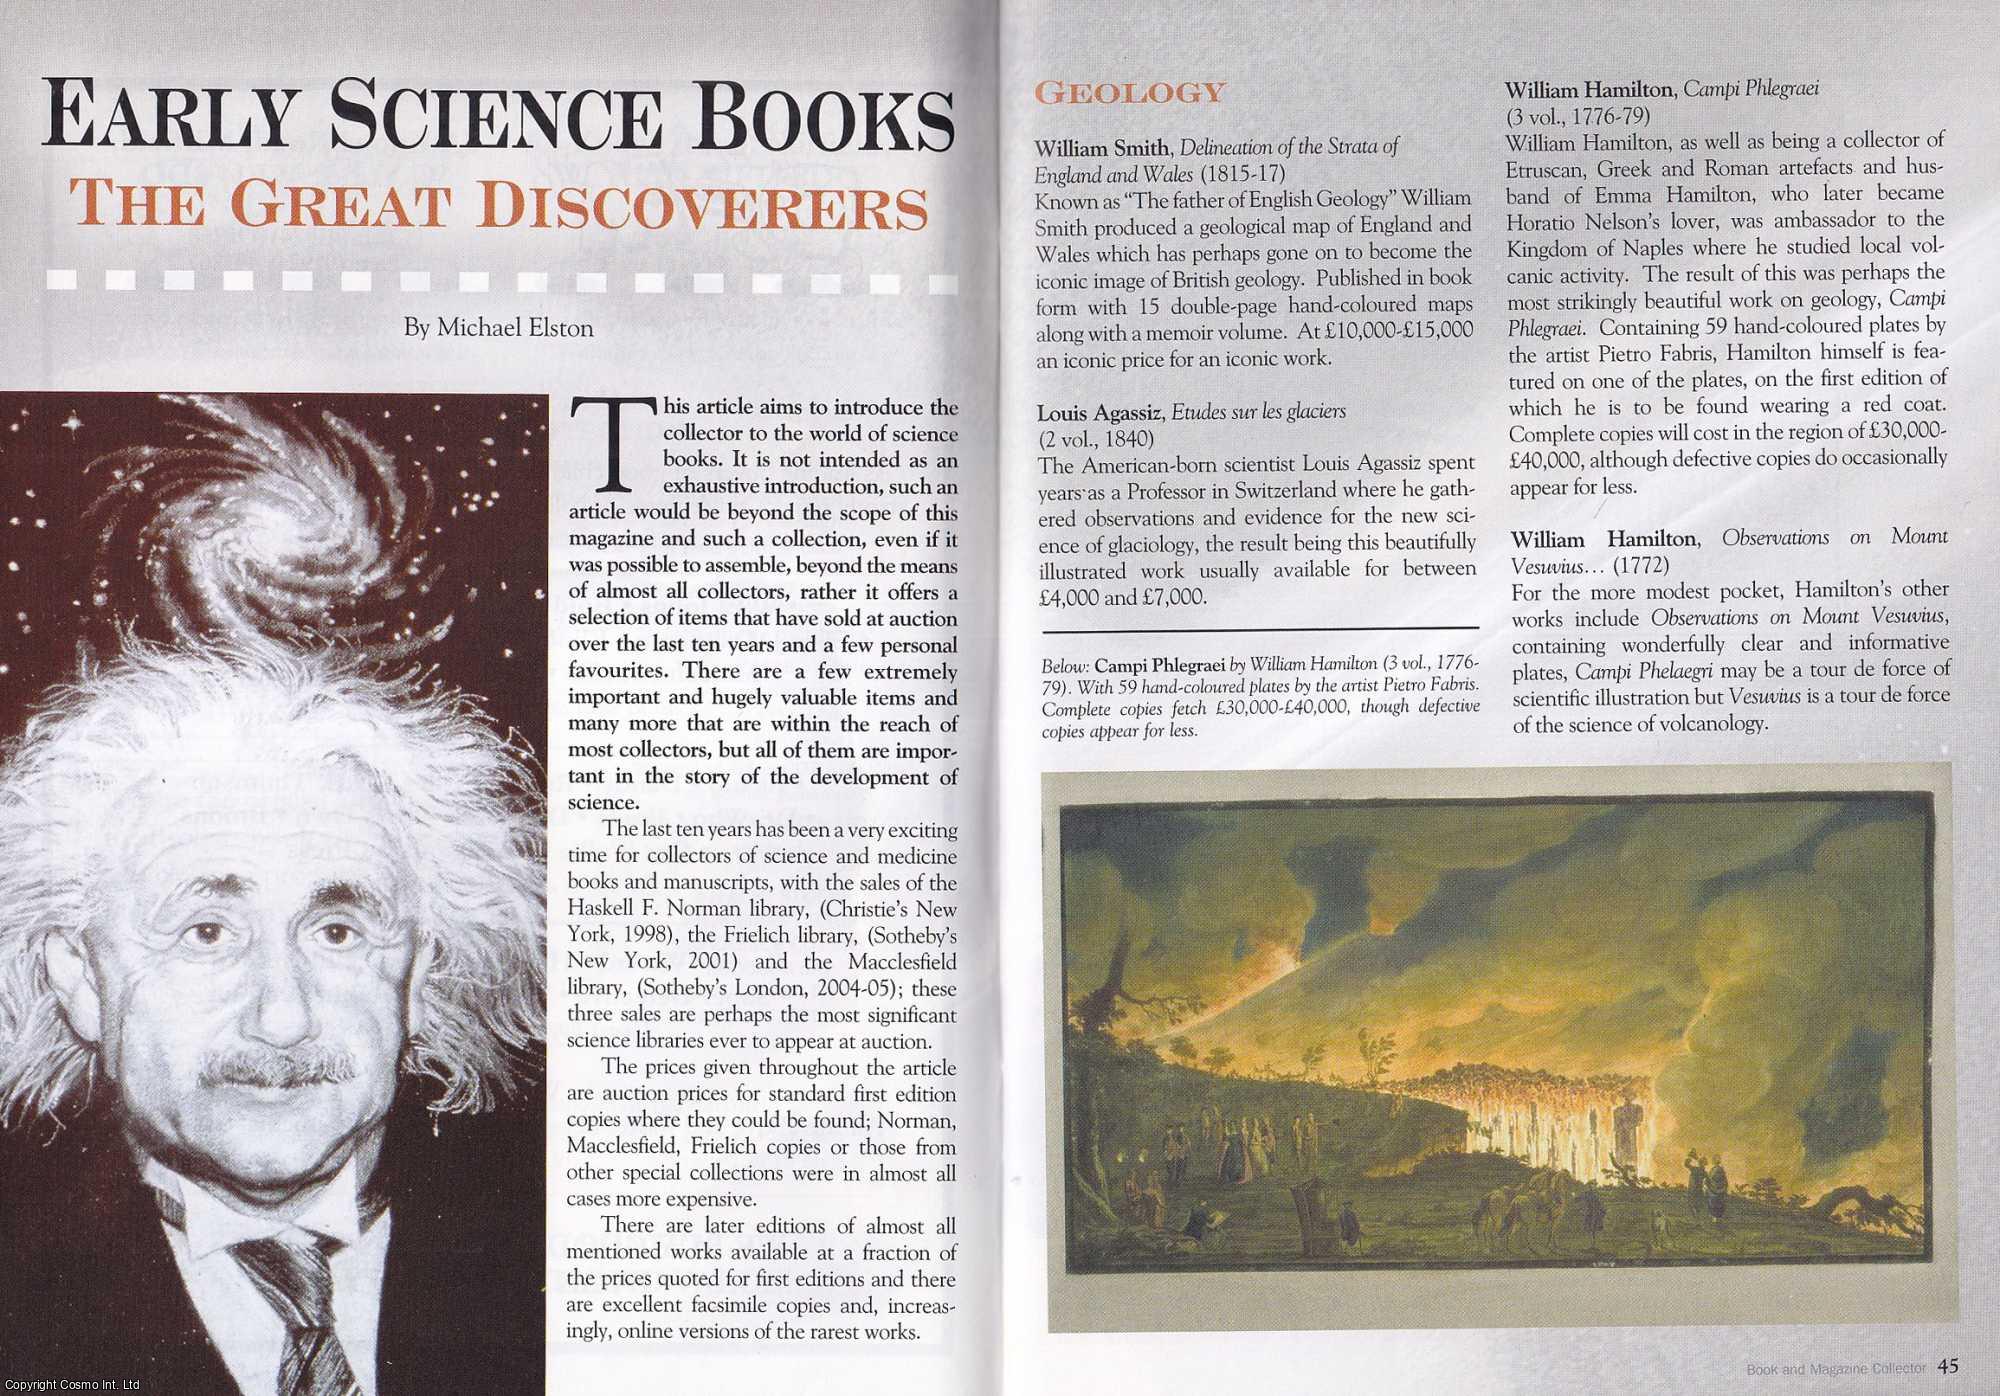 Michael Elston - Early Science Books. The Great Discoverers. This is an original article separated from an issue of The Book & Magazine Collector publication.